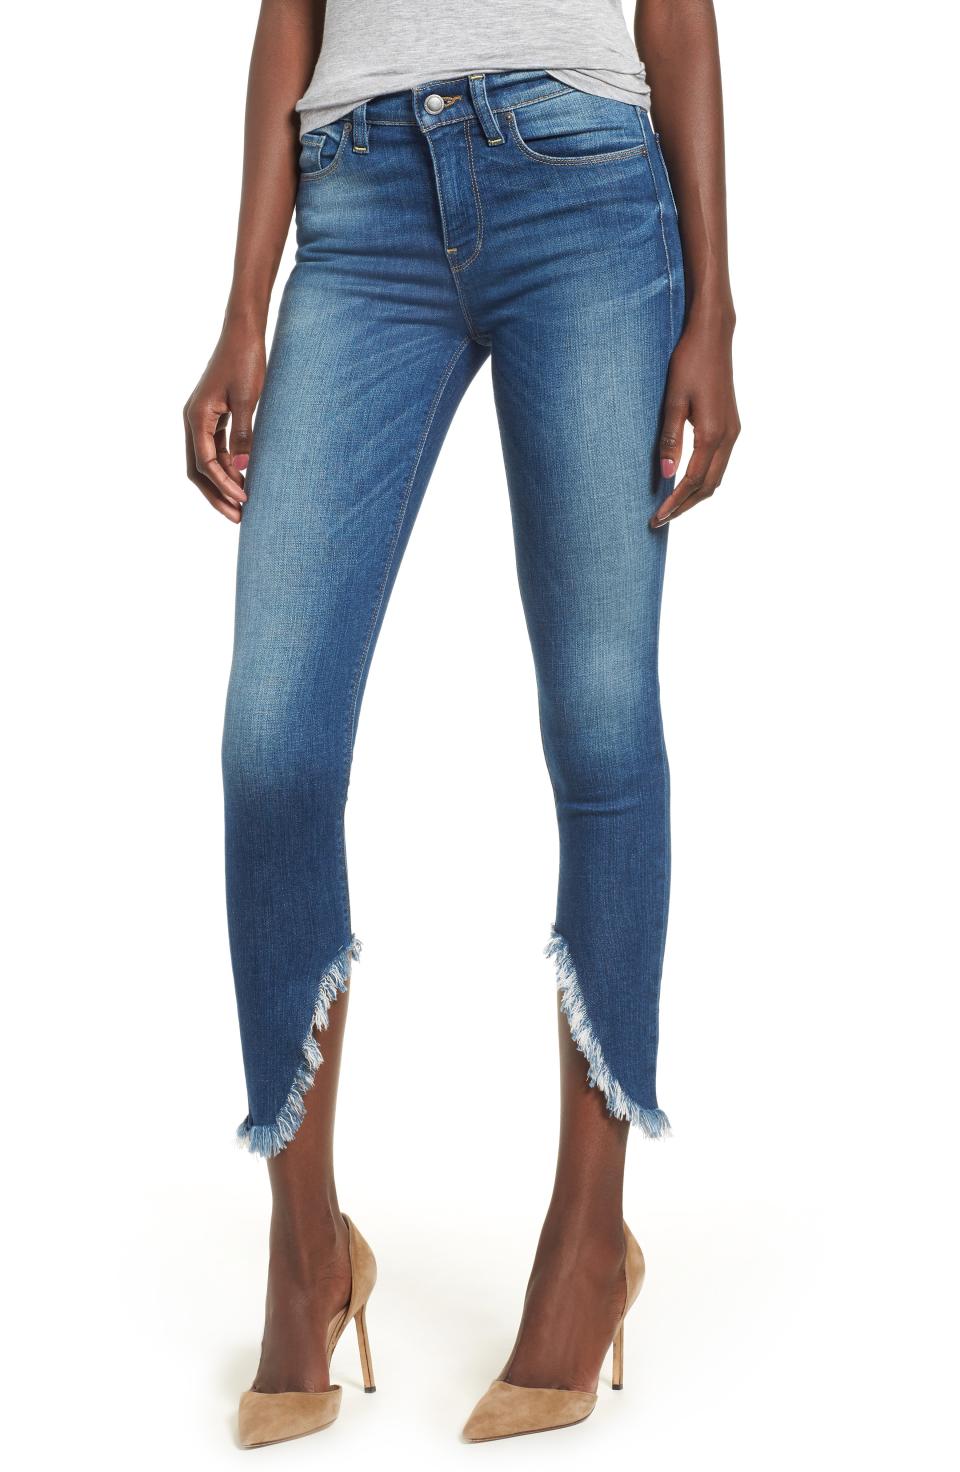 13) A Pair of Not-So-Basic Jeans